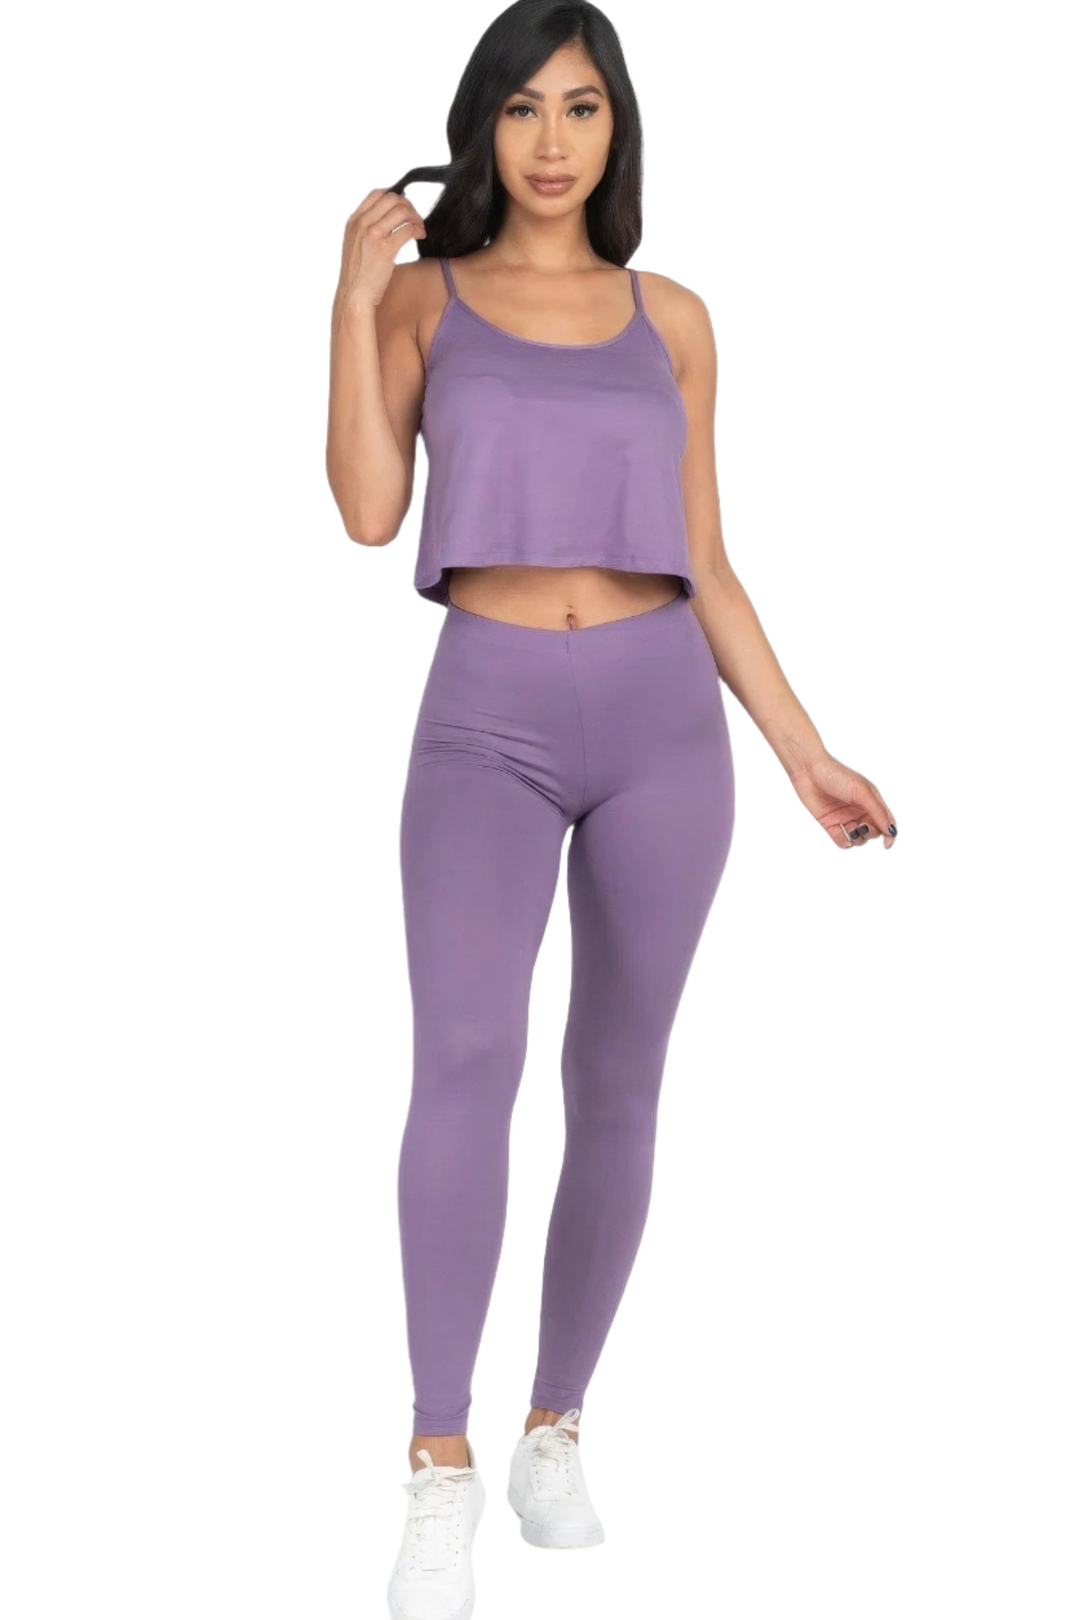 Grape 2-Piece Cami Top and Leggings Set with Spaghetti Straps